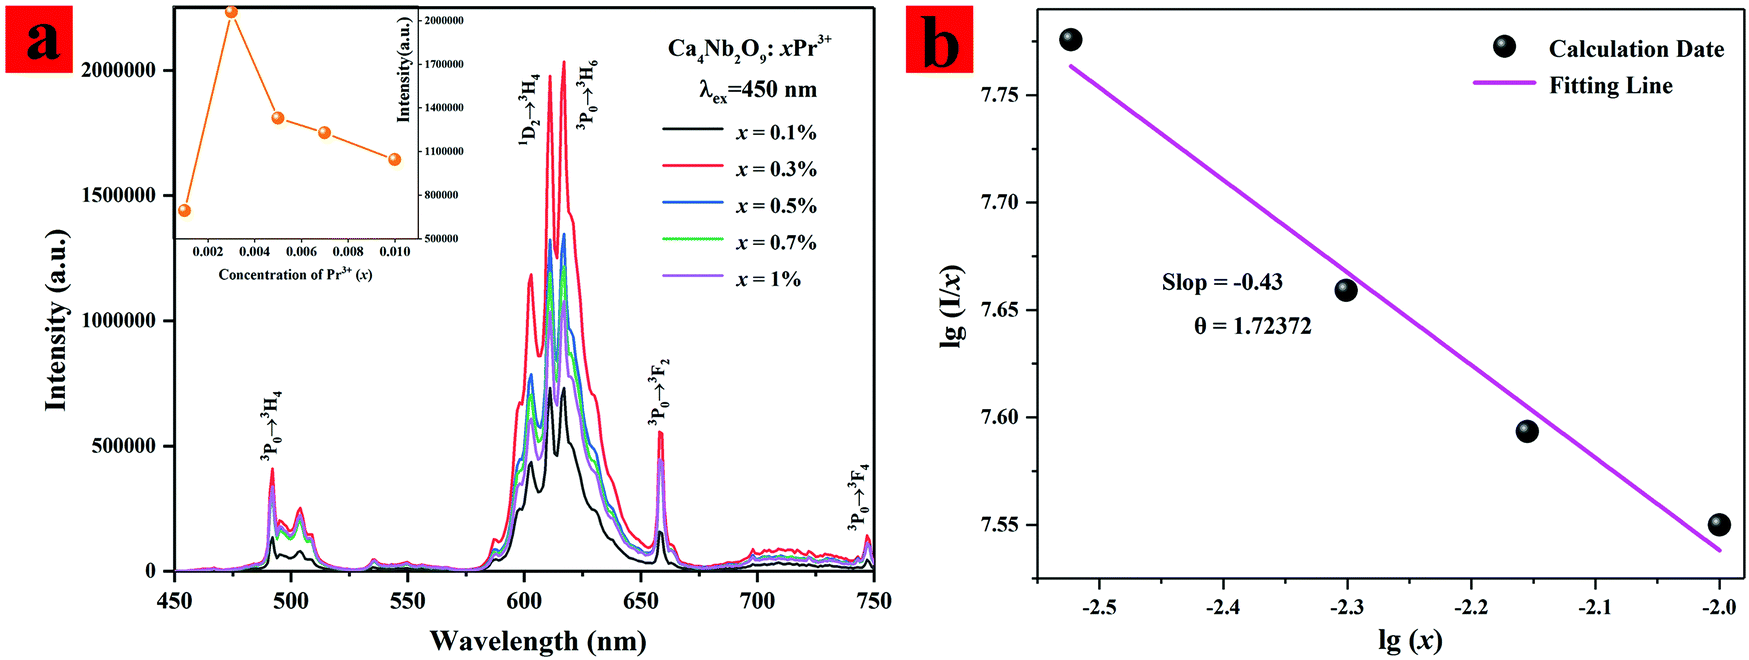 Crystal Structure Photoluminescence And Afterglow Properties Of Red Emitting Phosphors Ca 4 Nb 2 O 9 Pr 3 For Ac Leds New Journal Of Chemistry Rsc Publishing Doi 10 1039 D0njf